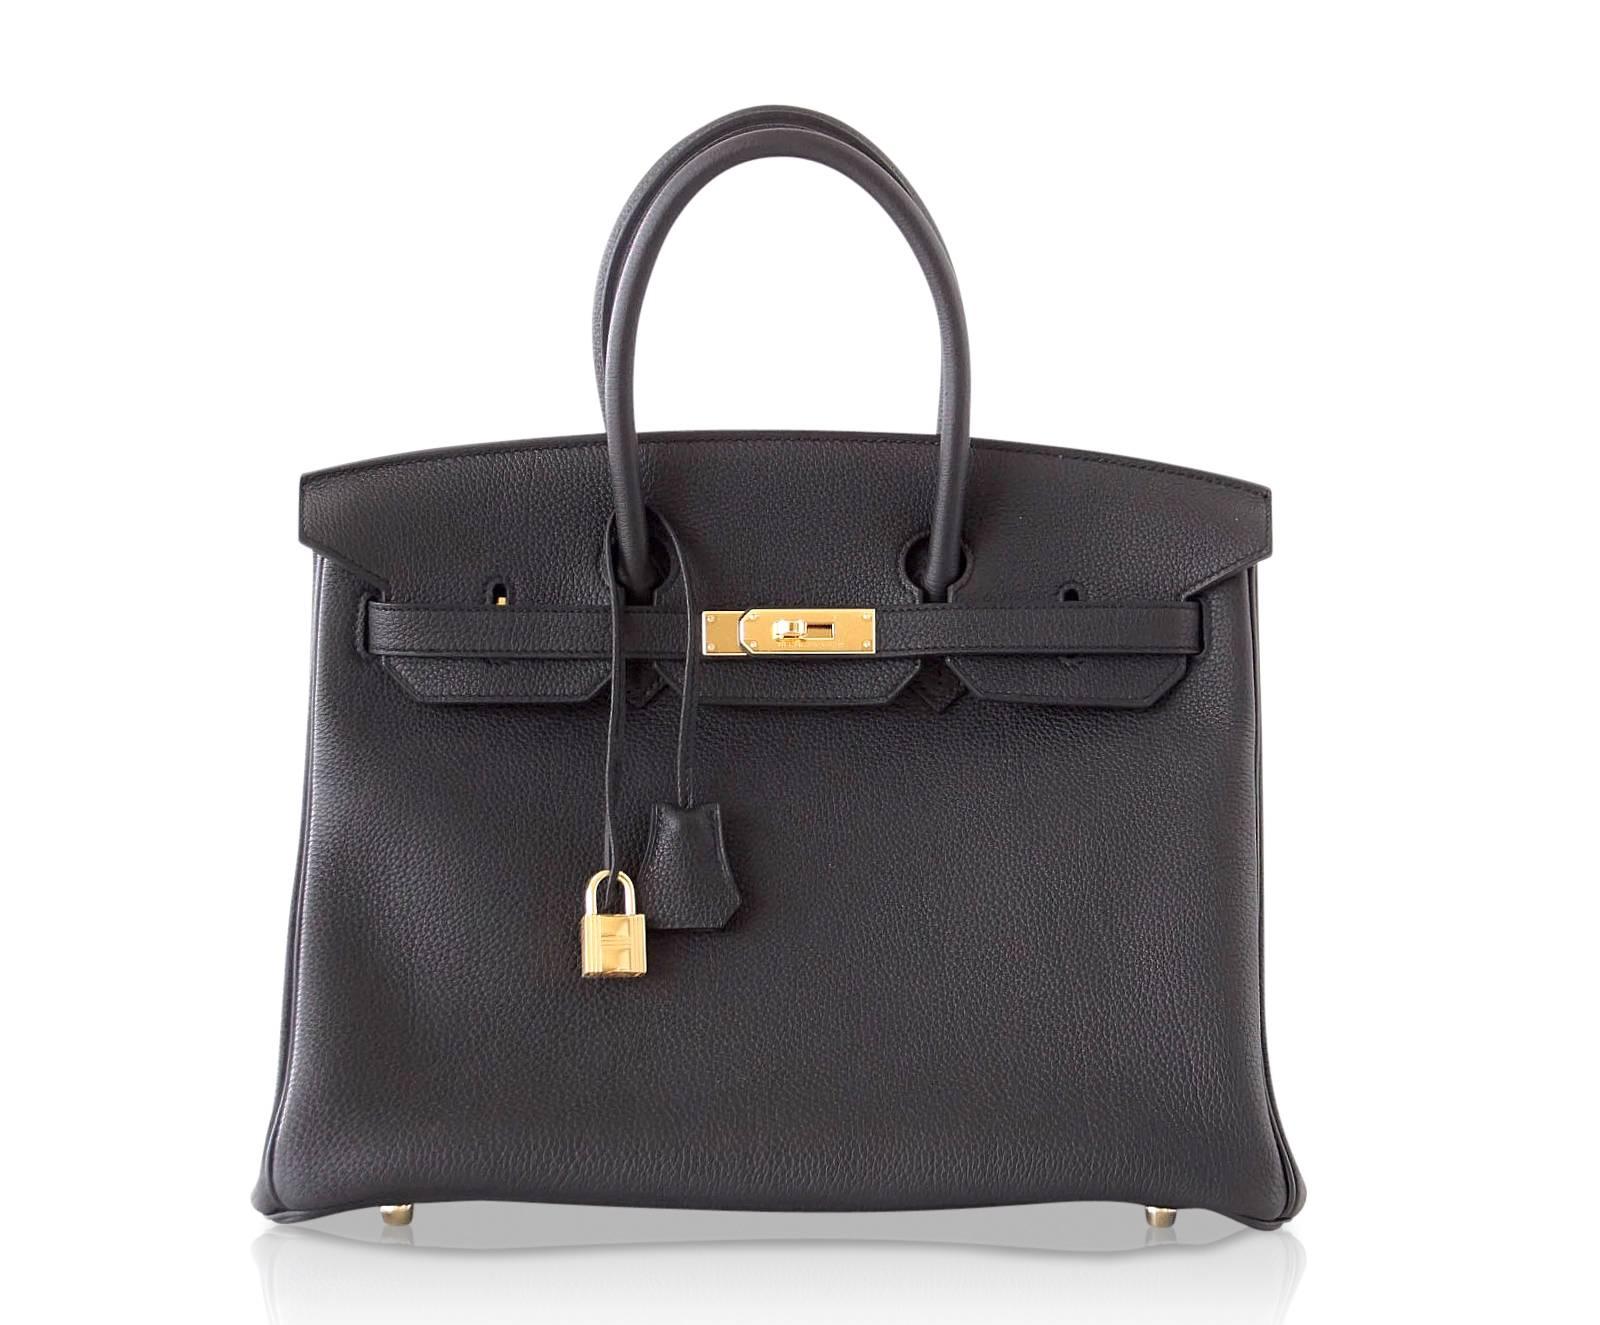 Guaranteed authentic sleek classic Black Hermes Birkin 35 is timeless.
Togo leather is textured and resistant to scratches.
Coveted with gold hardware.
Comes with lock, keys, clochette, sleepers, raincoat and signature Hermes orange box.
NEW or